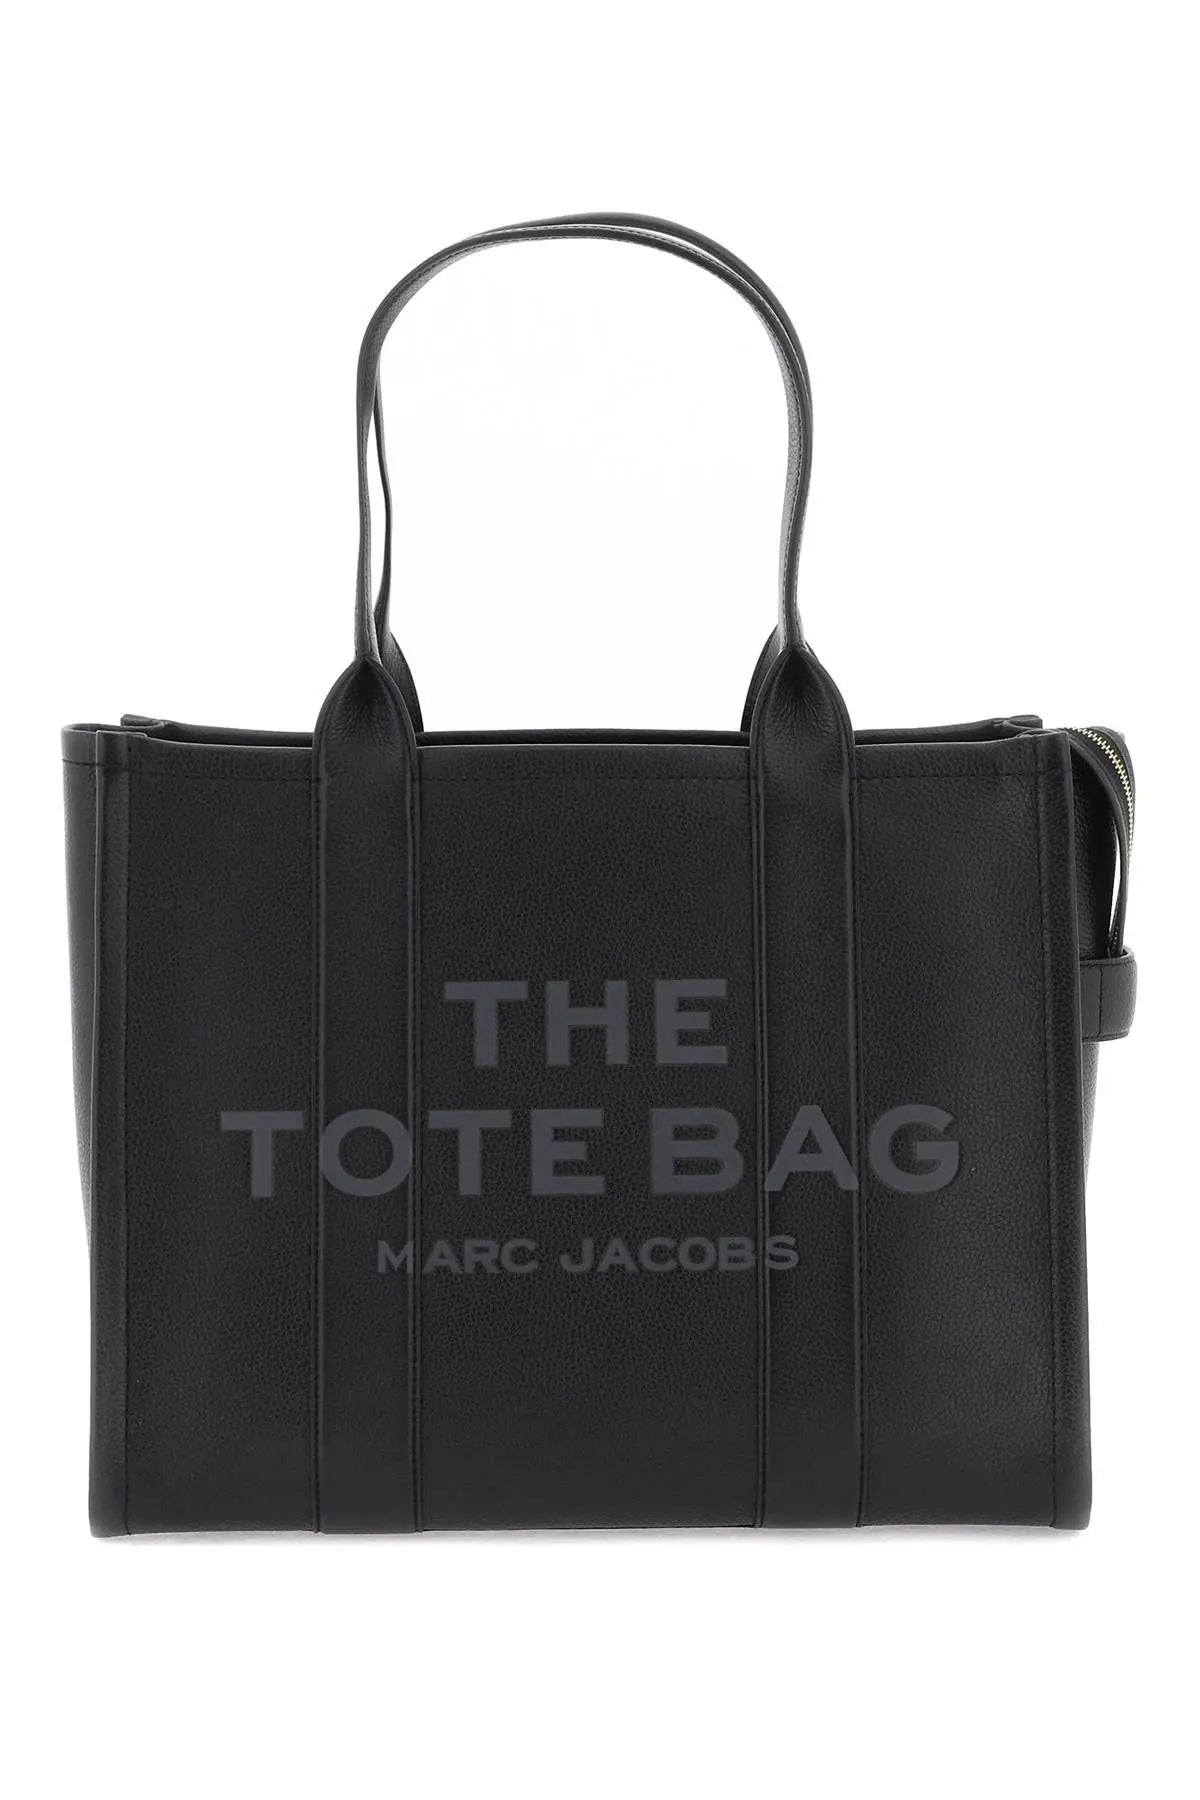 Marc Jacobs Black Large Leather Tote Bag